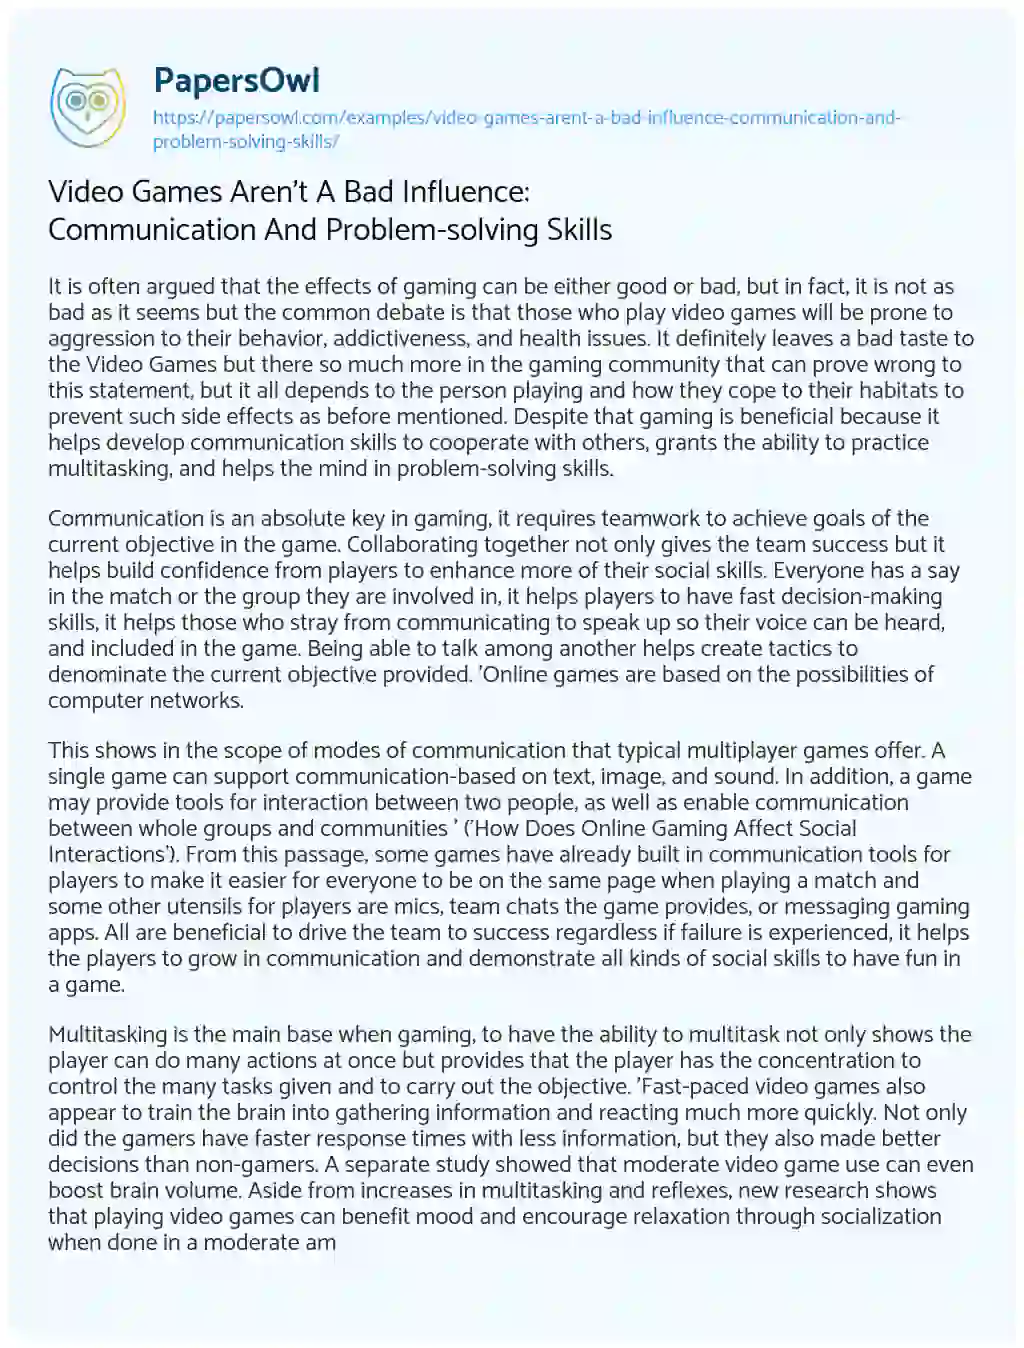 Essay on Video Games aren’t a Bad Influence: Communication And Problem-solving Skills